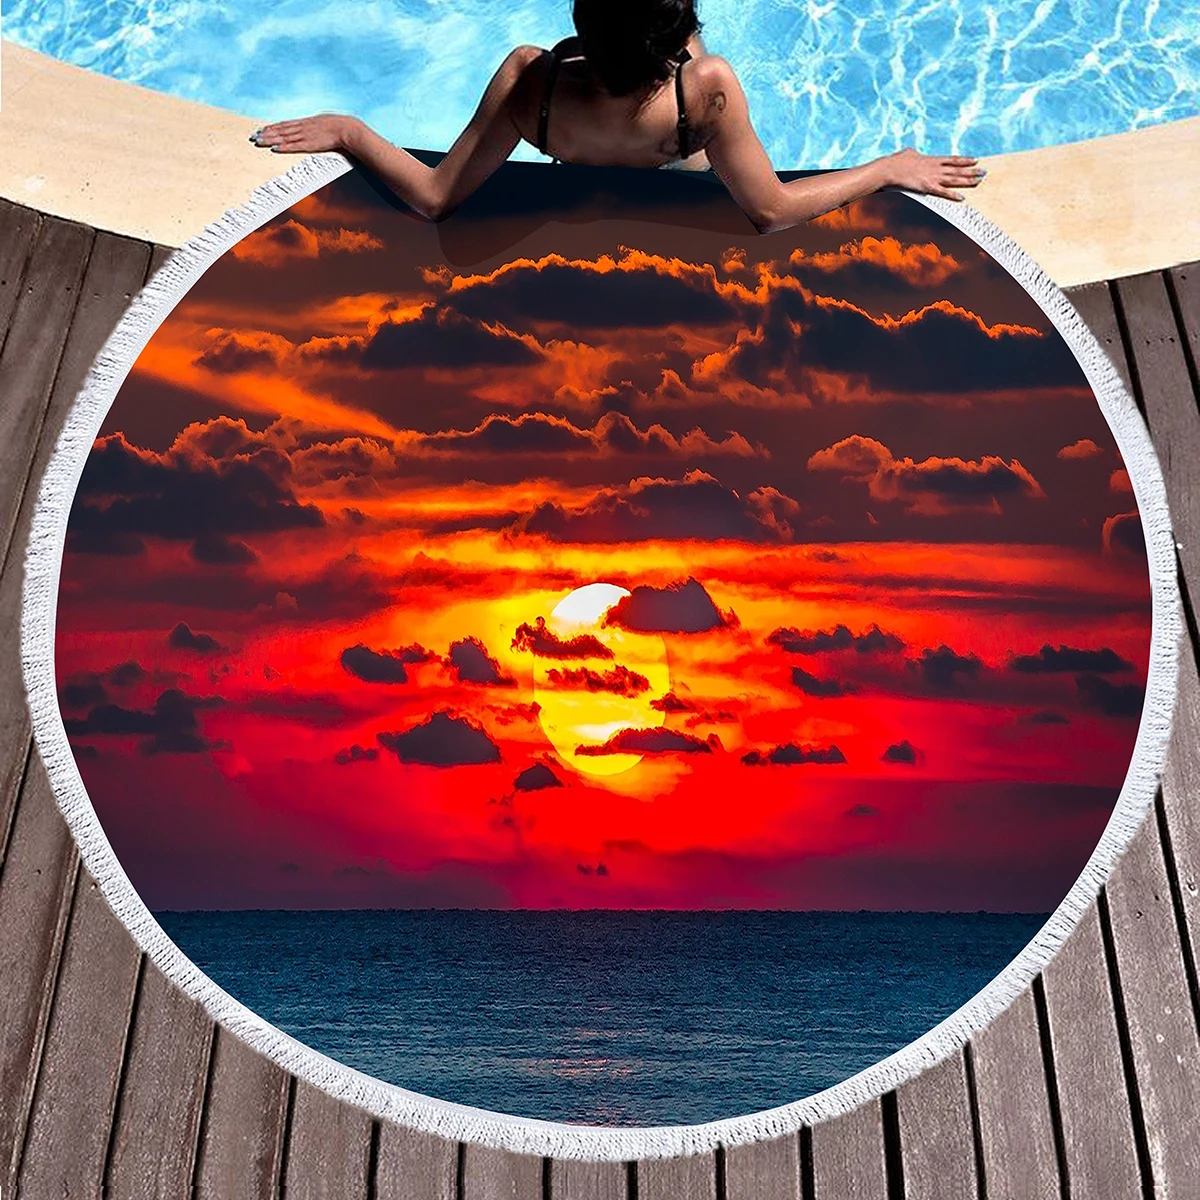 

Wonderful Sunrise Pattern Round Beach Towels,Polyester Sand Resistant Beach Blankets,Absorbent Quick Dry Pool Towels Picnic Mats